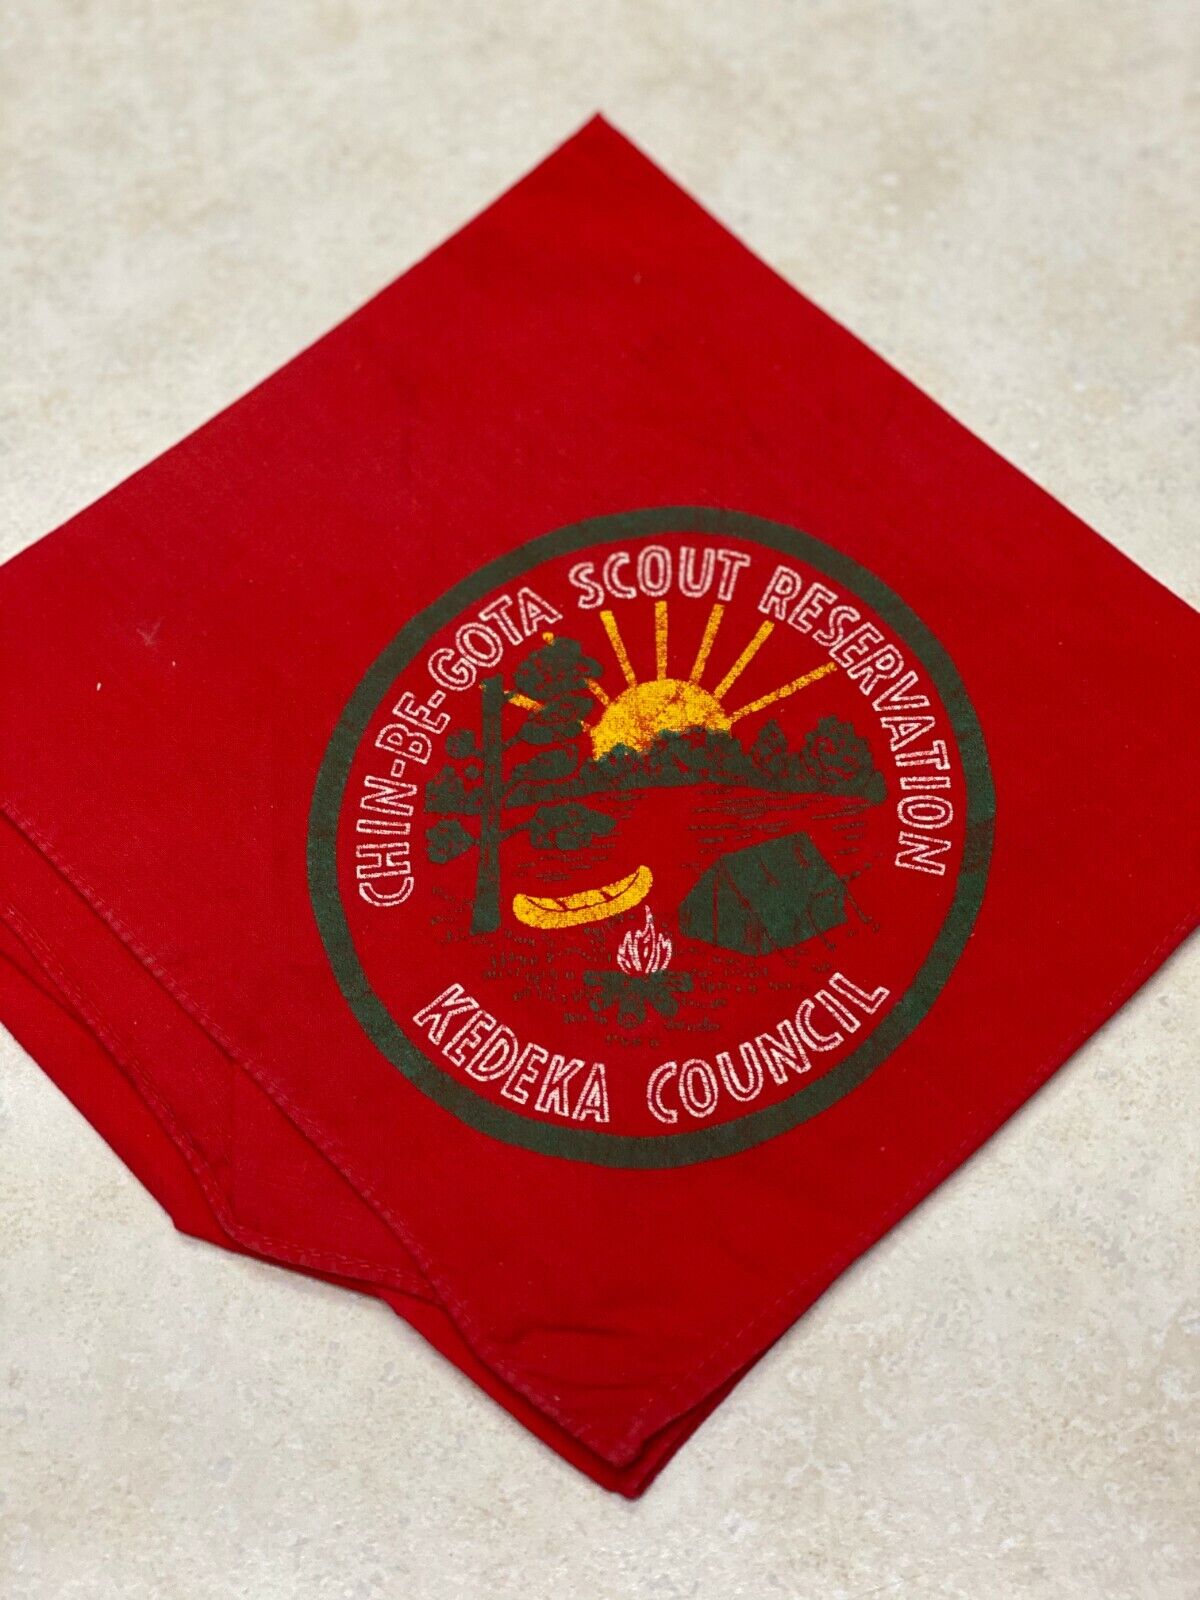 Chin-Be-Gota Scout Reservation Red Camp Neckerchief - Kedeka Council